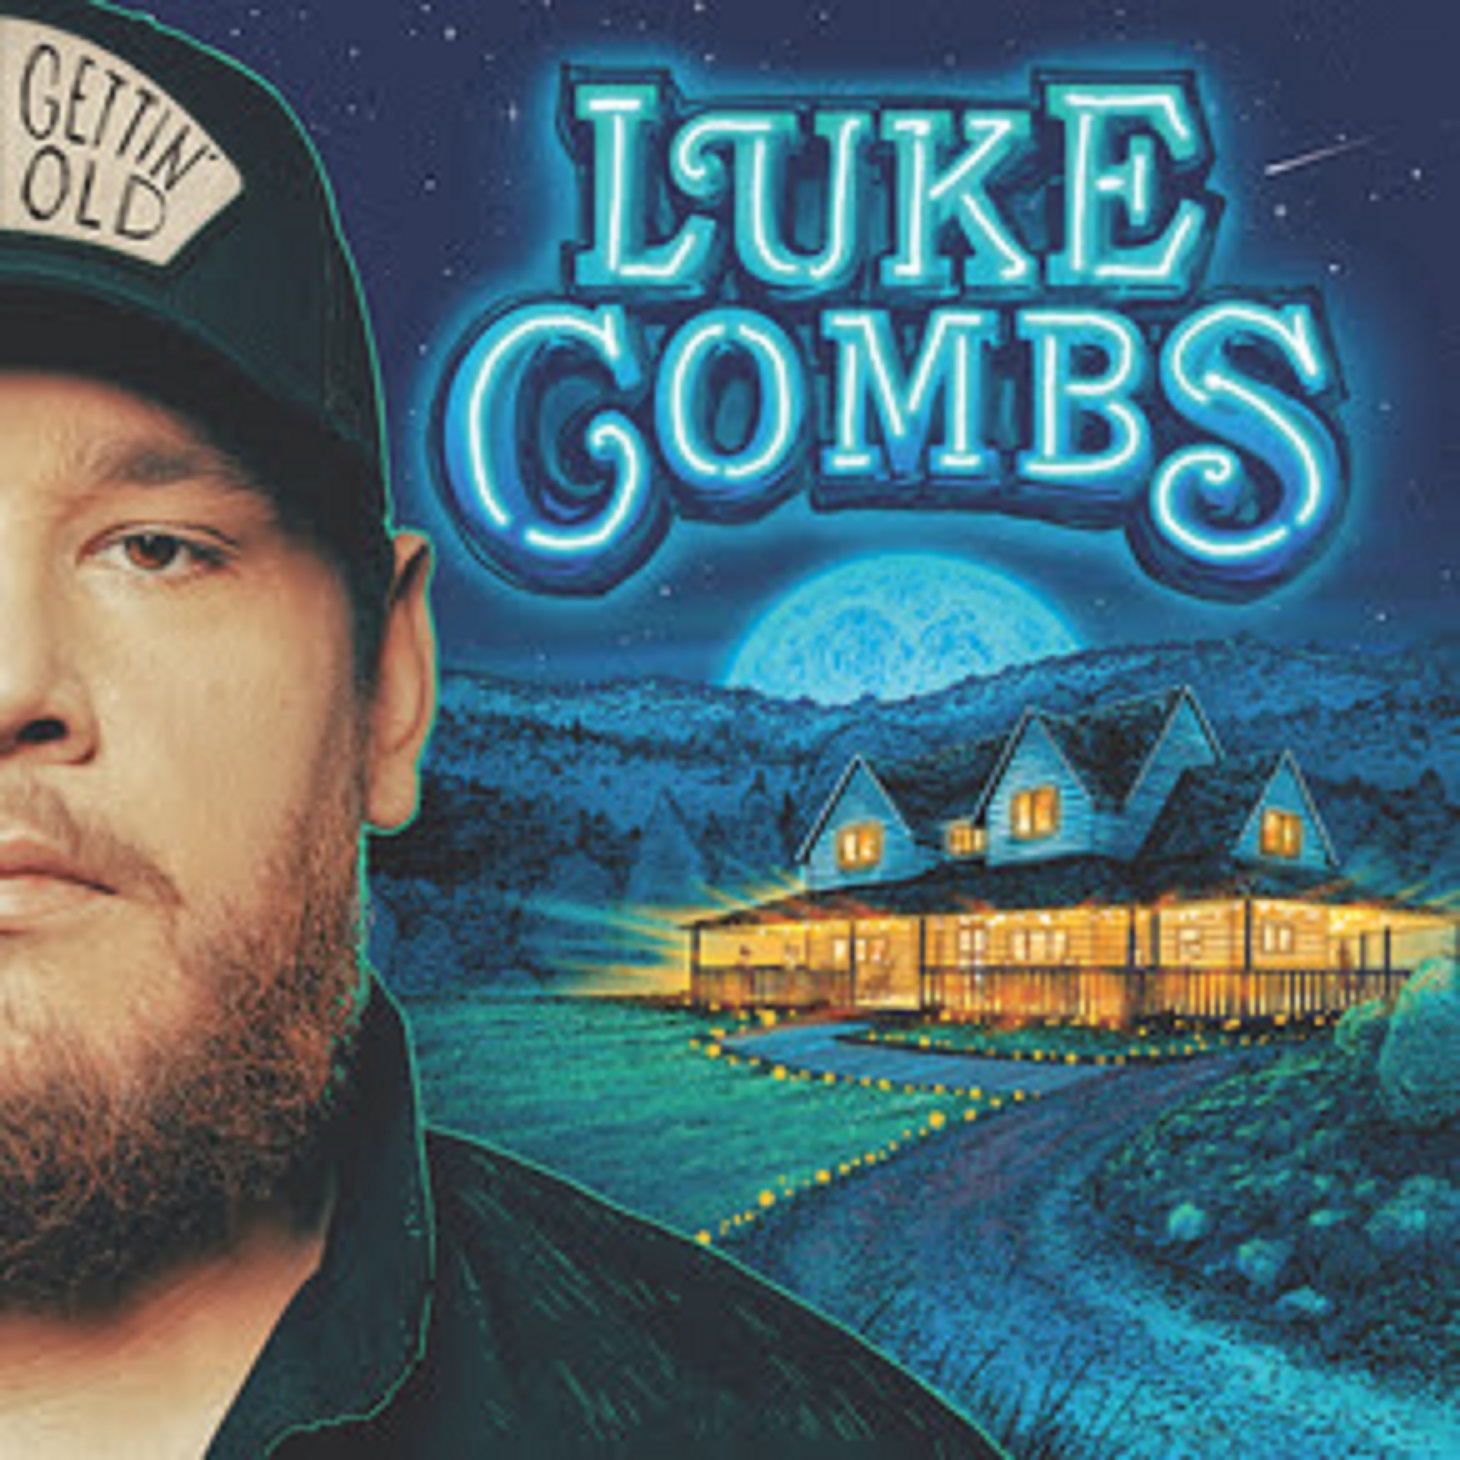 Luke Combs’ new album "Gettin’ Old" out today